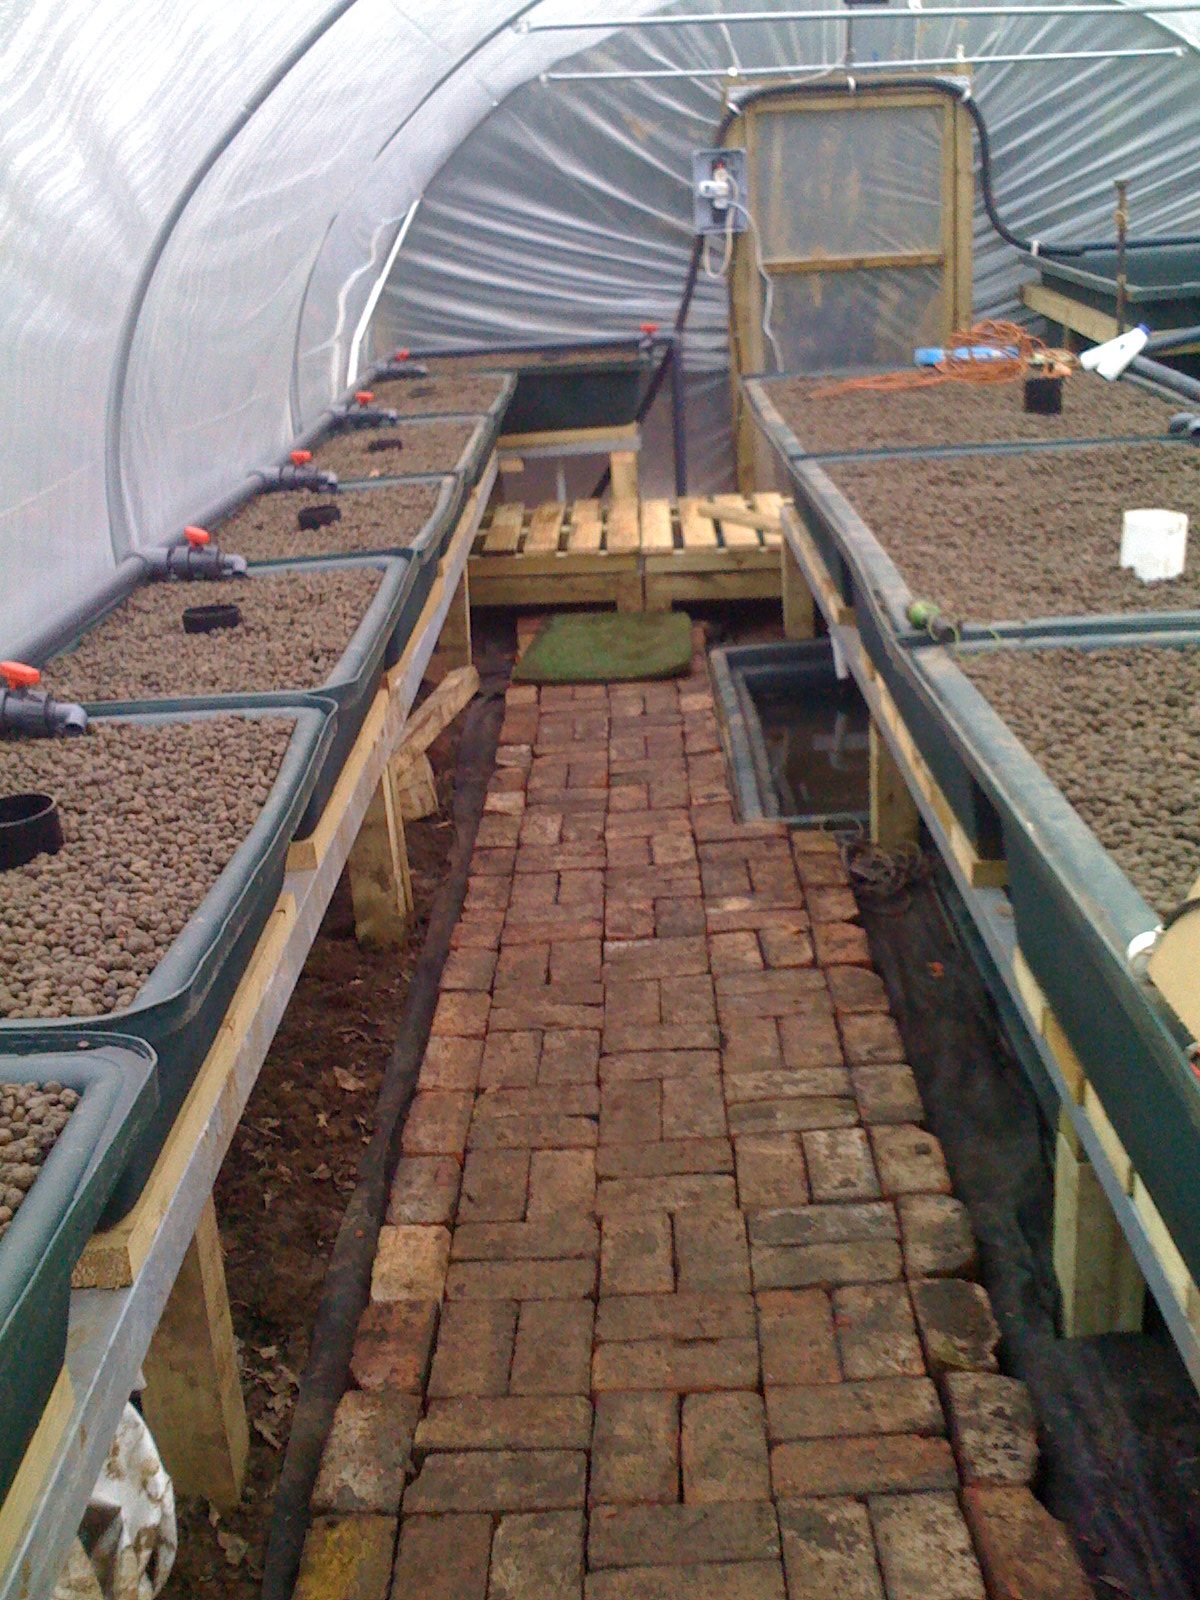 Greenhouse/Polytunnel | Garden Aquaponics in the UK